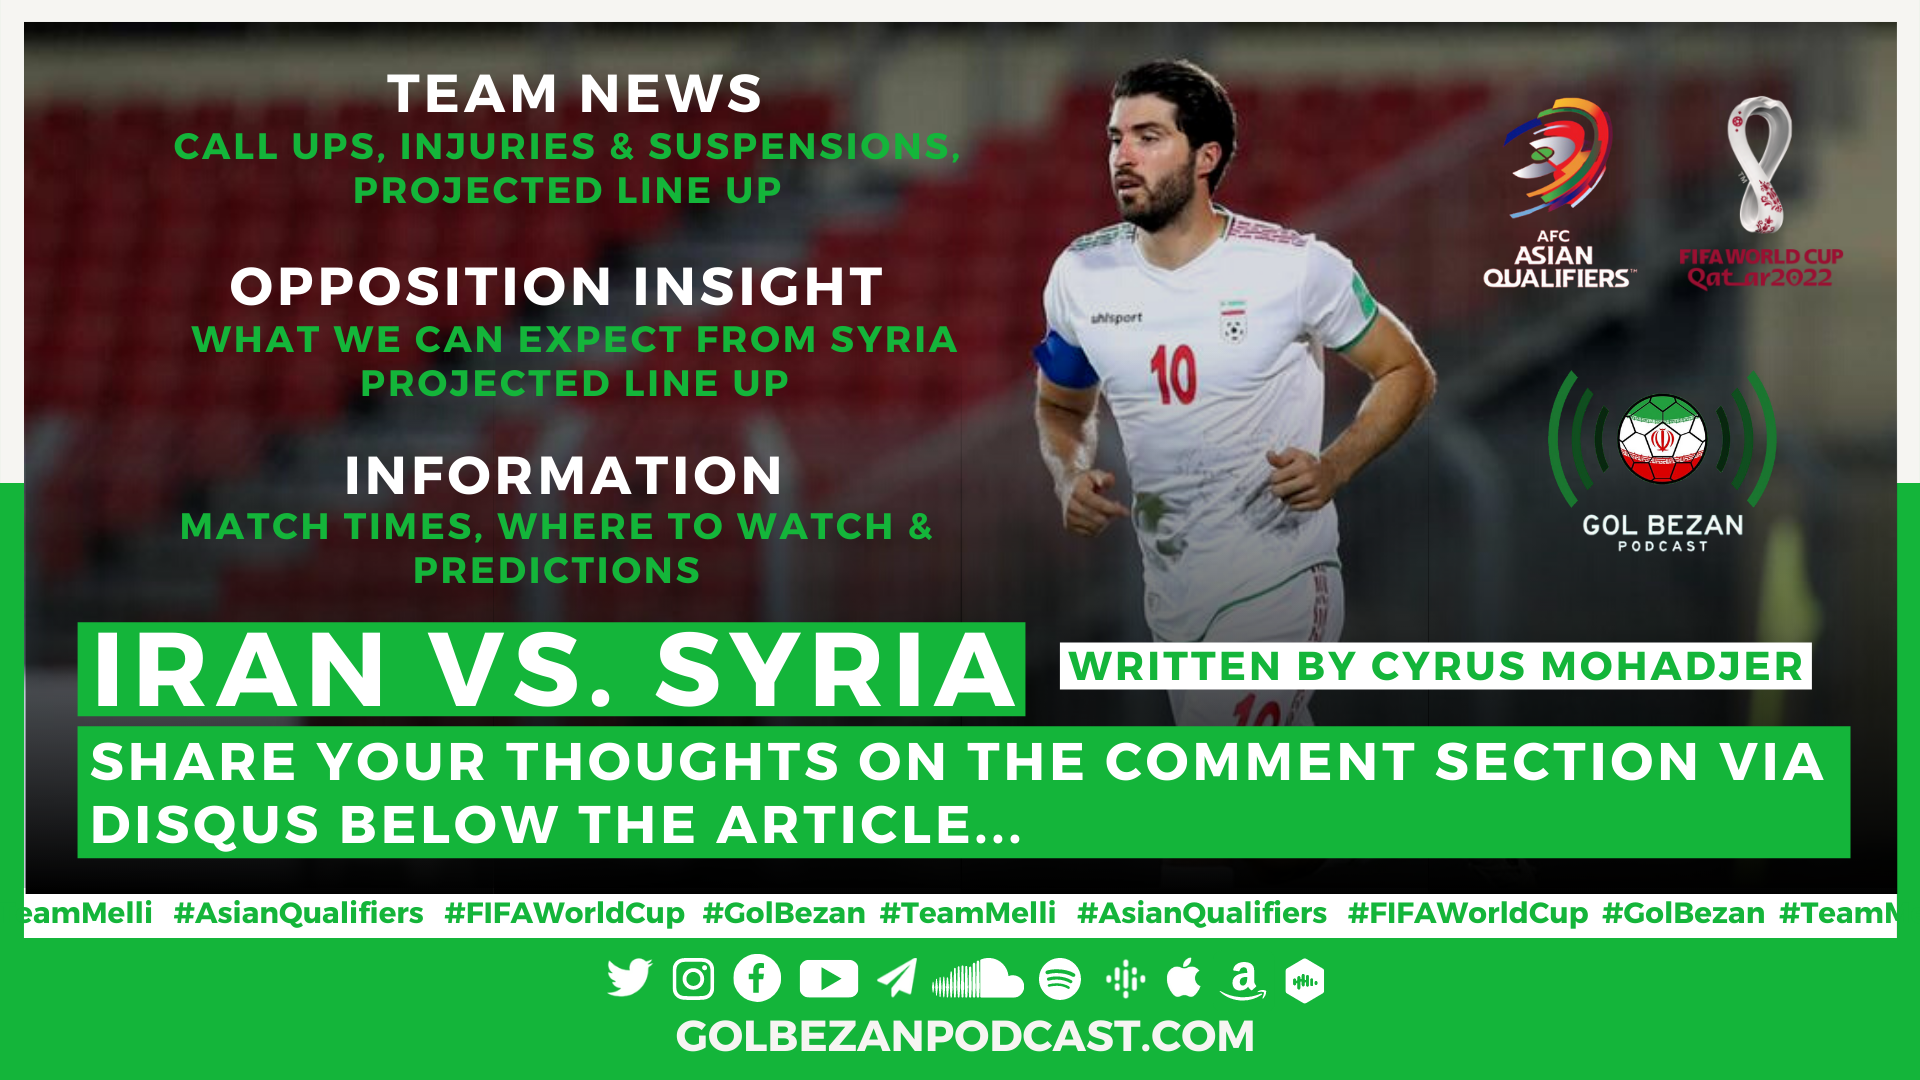 PREVIEW: Iran vs. Syria | 2022 World Cup Qualifiers - Team News, Opposition Insight, Predictions and More